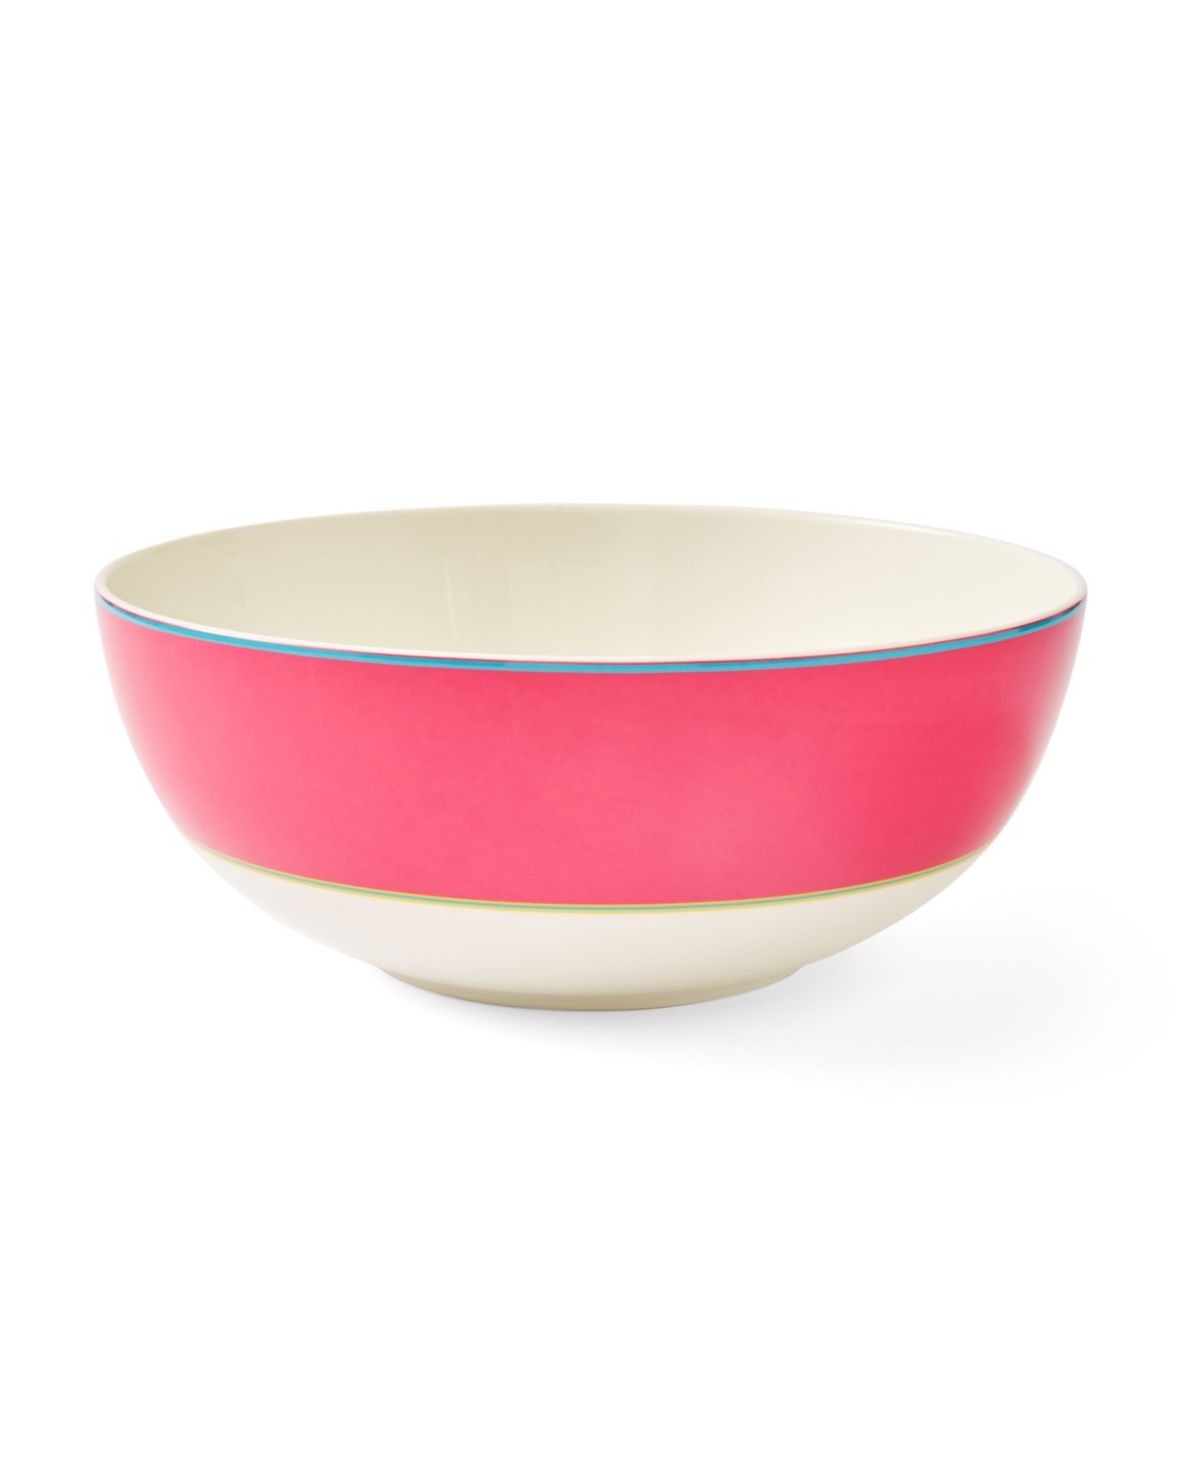 Kit Kemp For Spode Calypso Serving Bowl, 10" In Pink